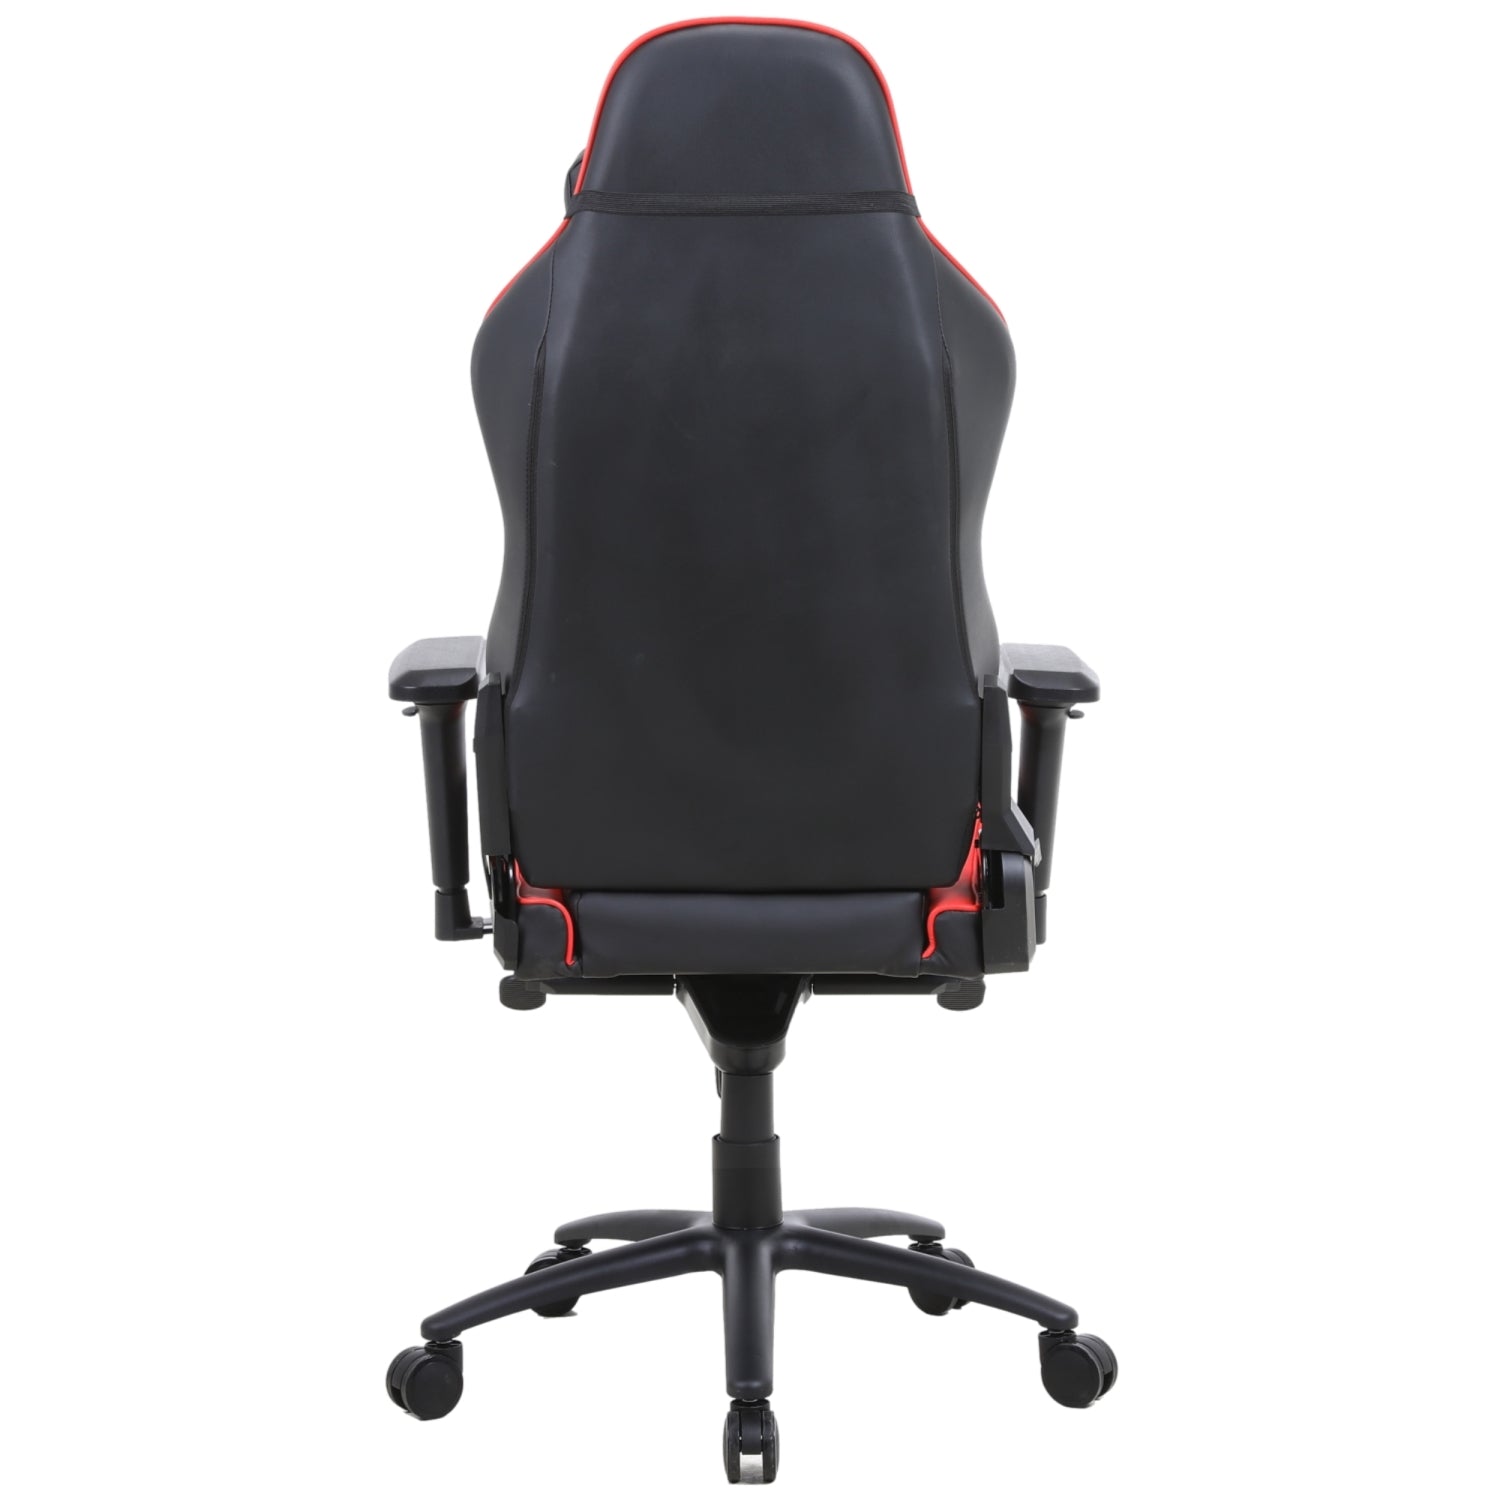 ViscoLogic VANGUARD Premium Grade Series Ergonomic Quilted PU Leather Upholstery Home Office Computer Desk Gaming Chair (Black & Red)